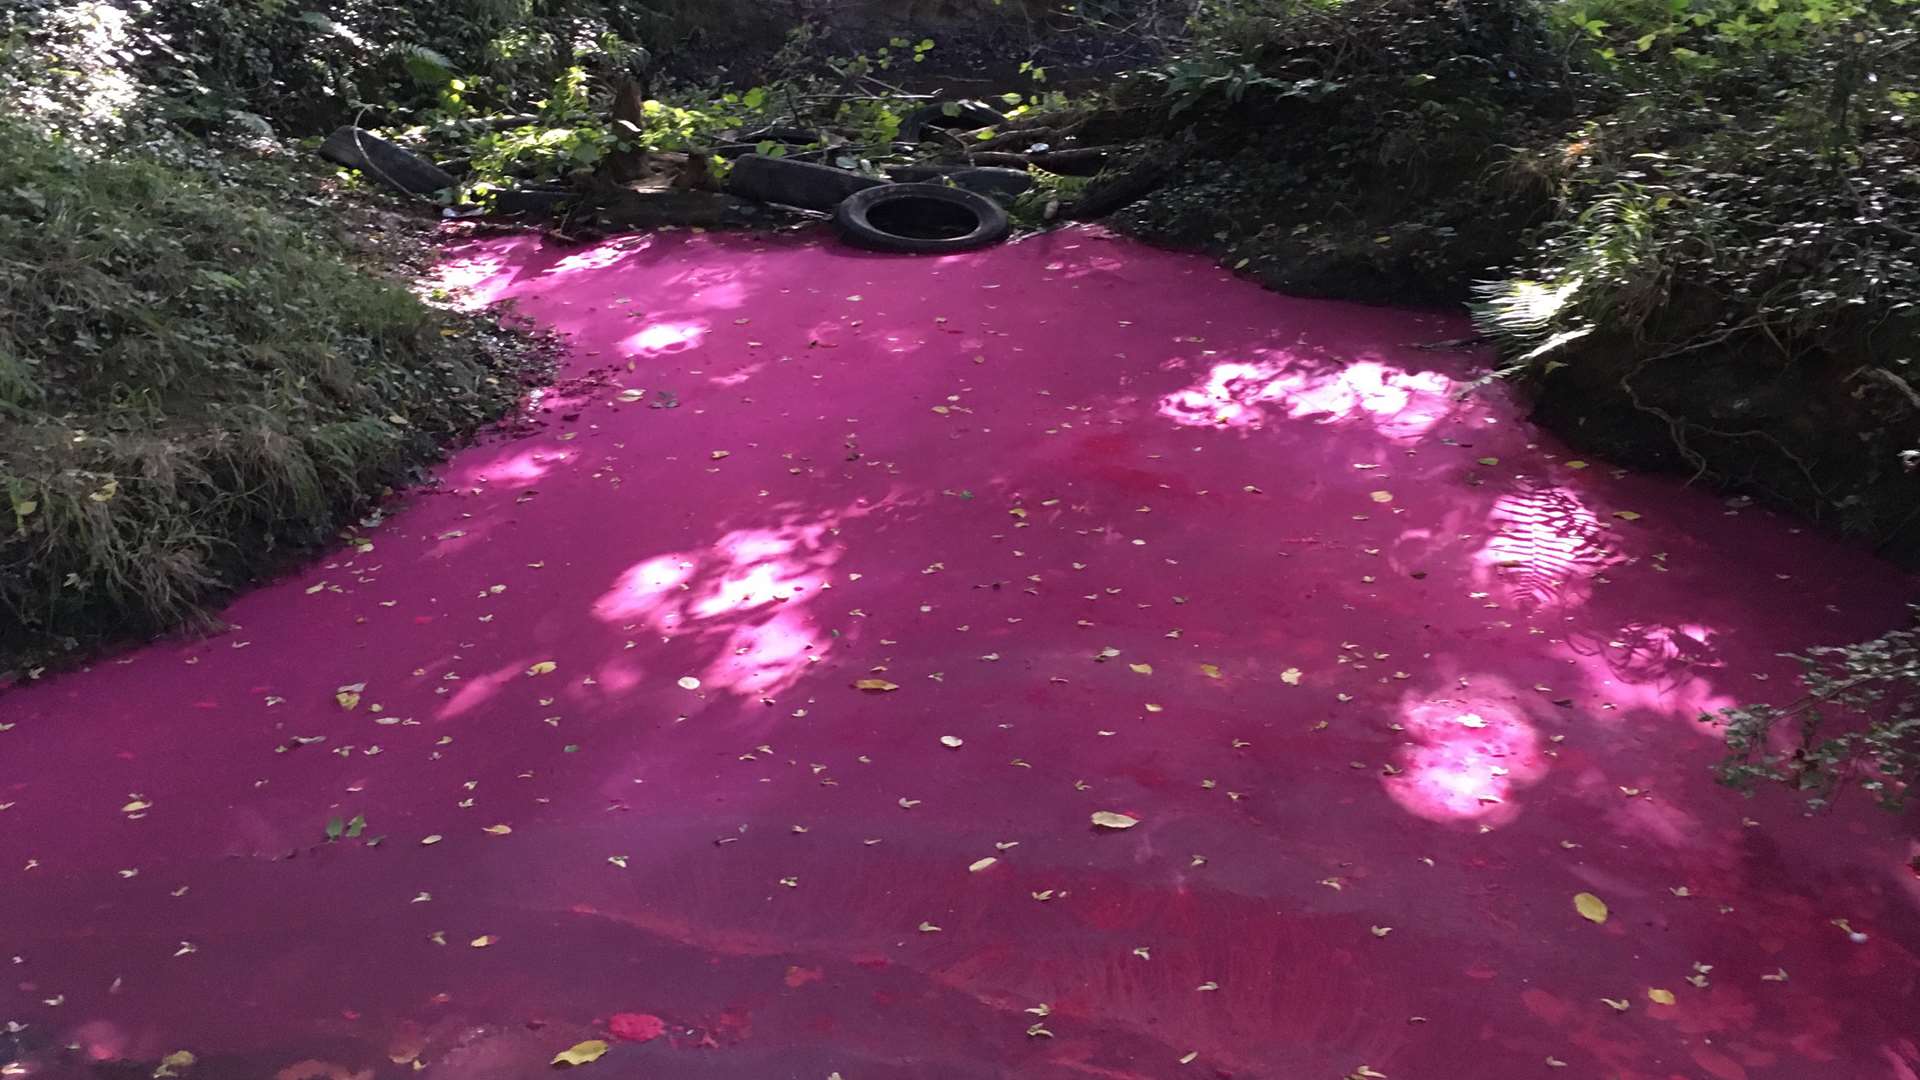 The river turned bright pink